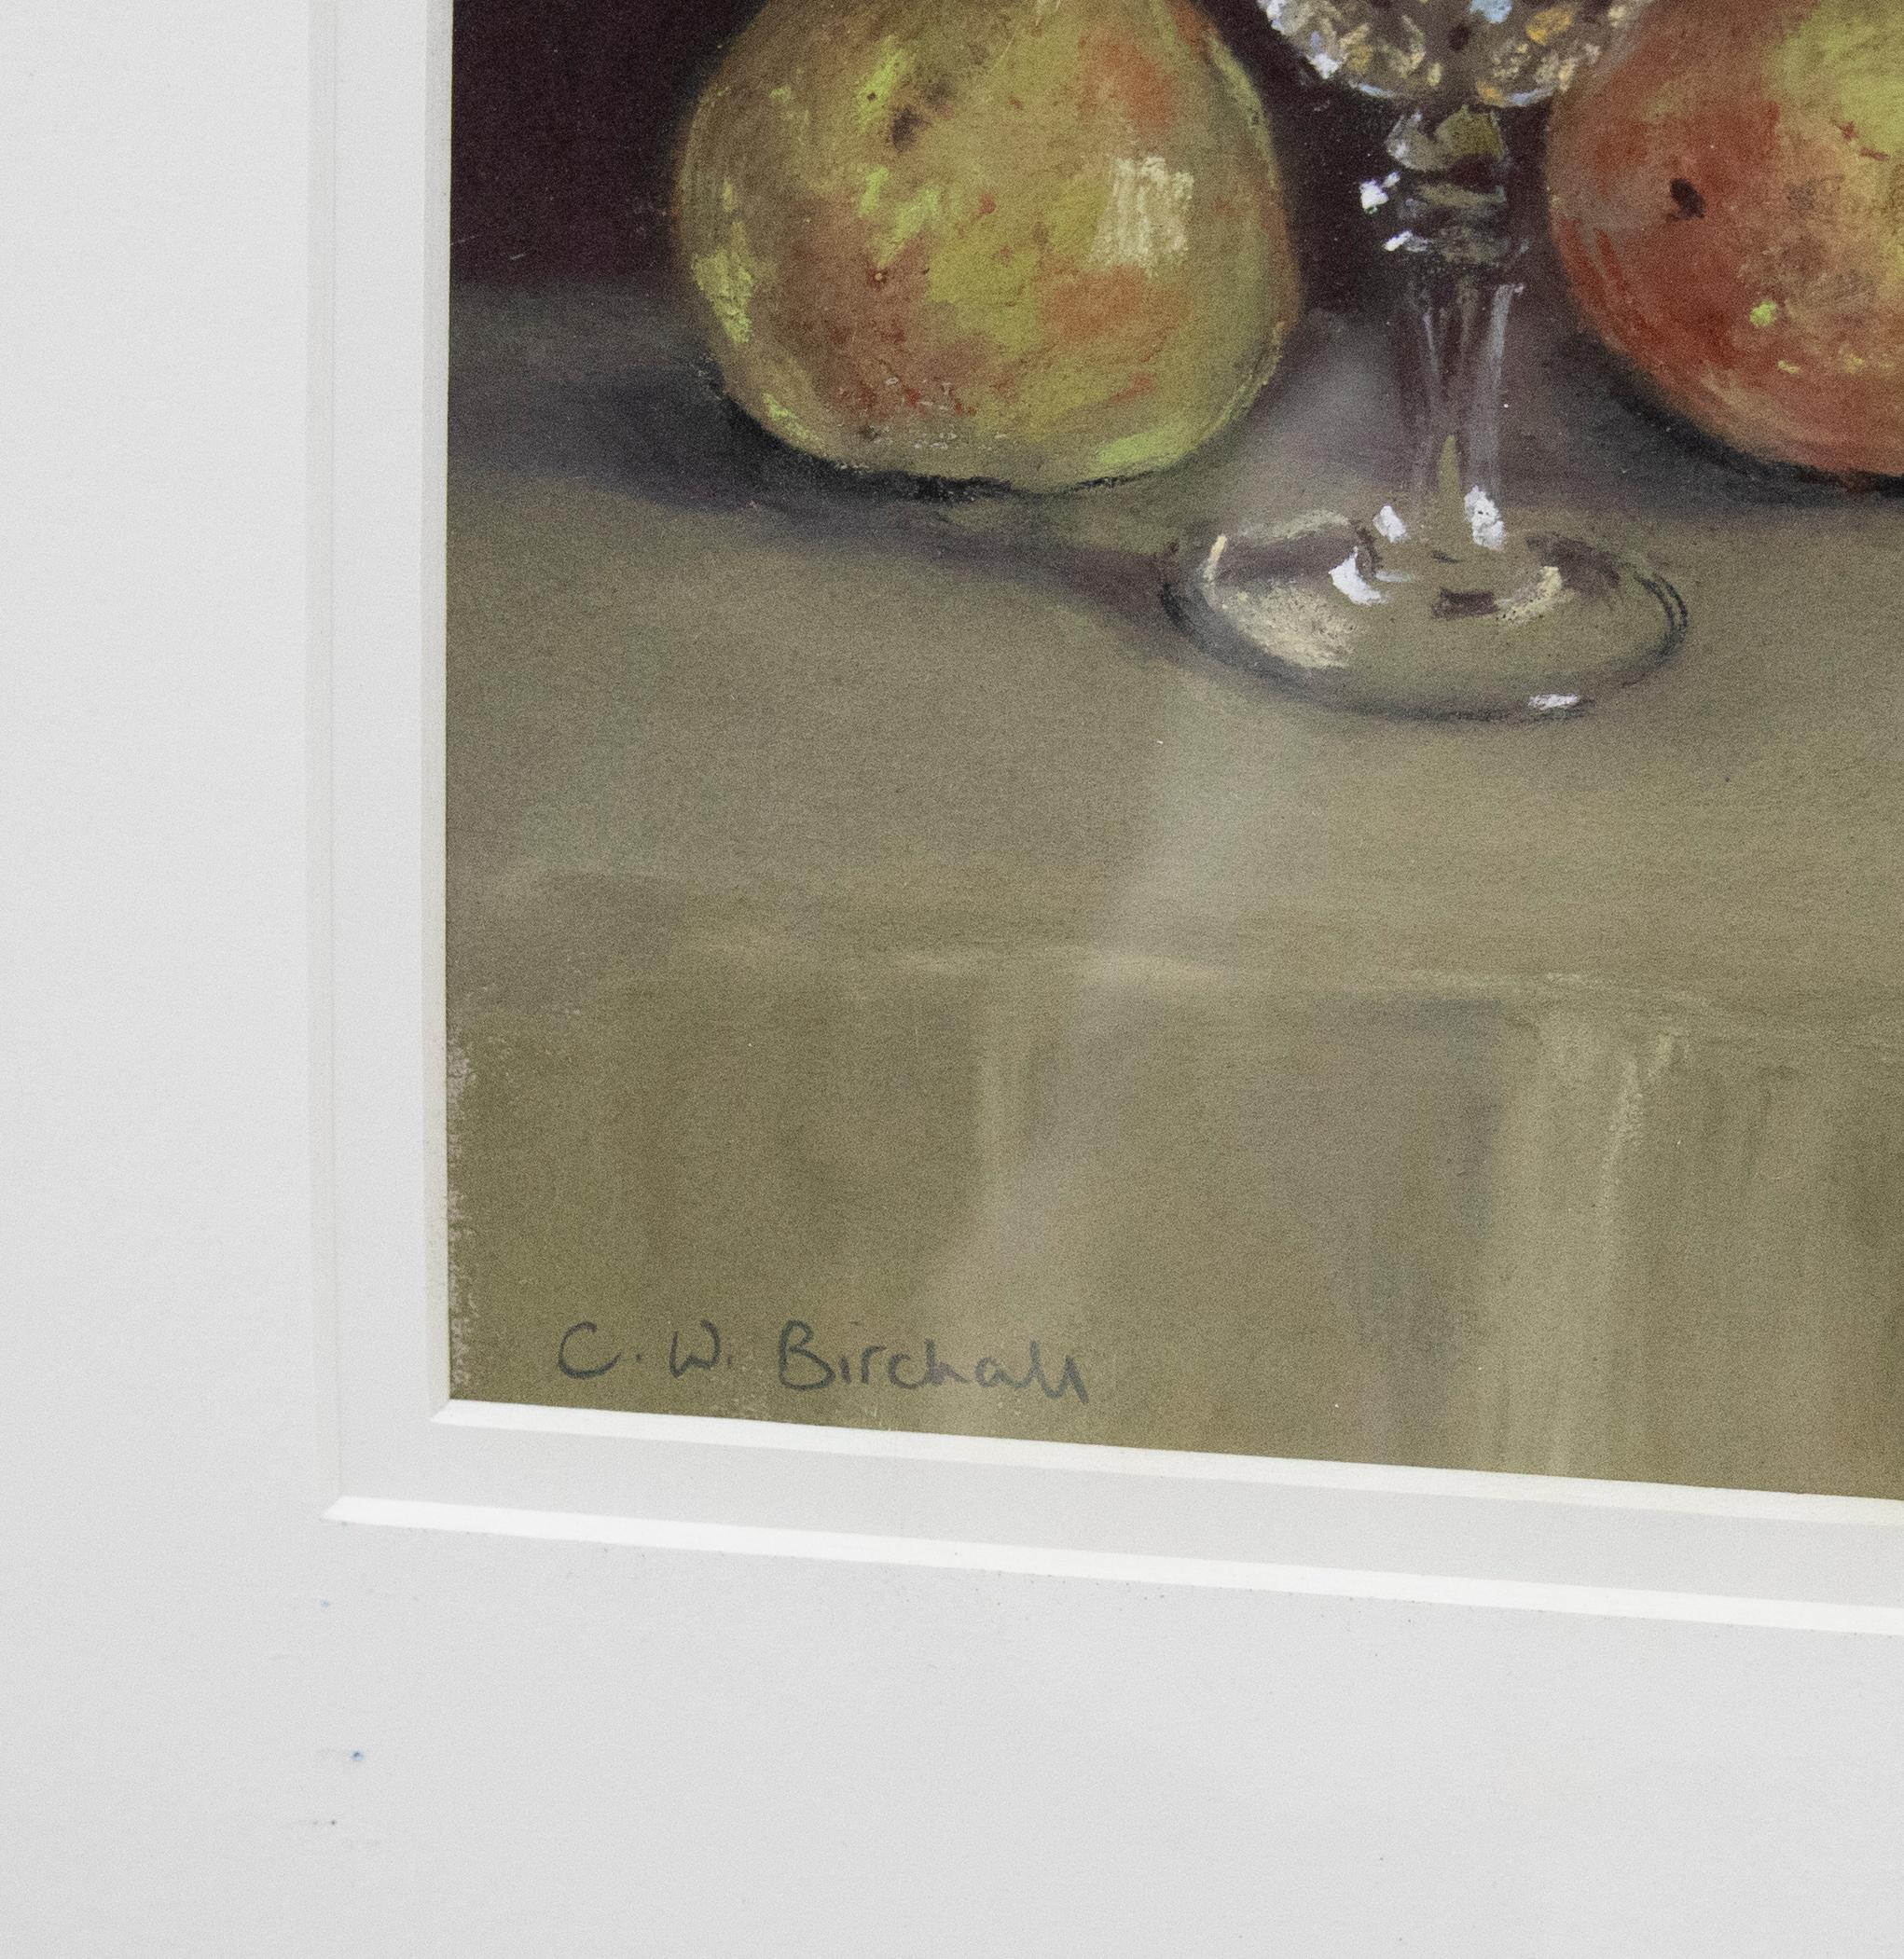 A delightful pastel study depicting two pears and a glass of Chablis. Signed in graphite to the lower left. Presented in a gilt frame and double card mount. On paper.